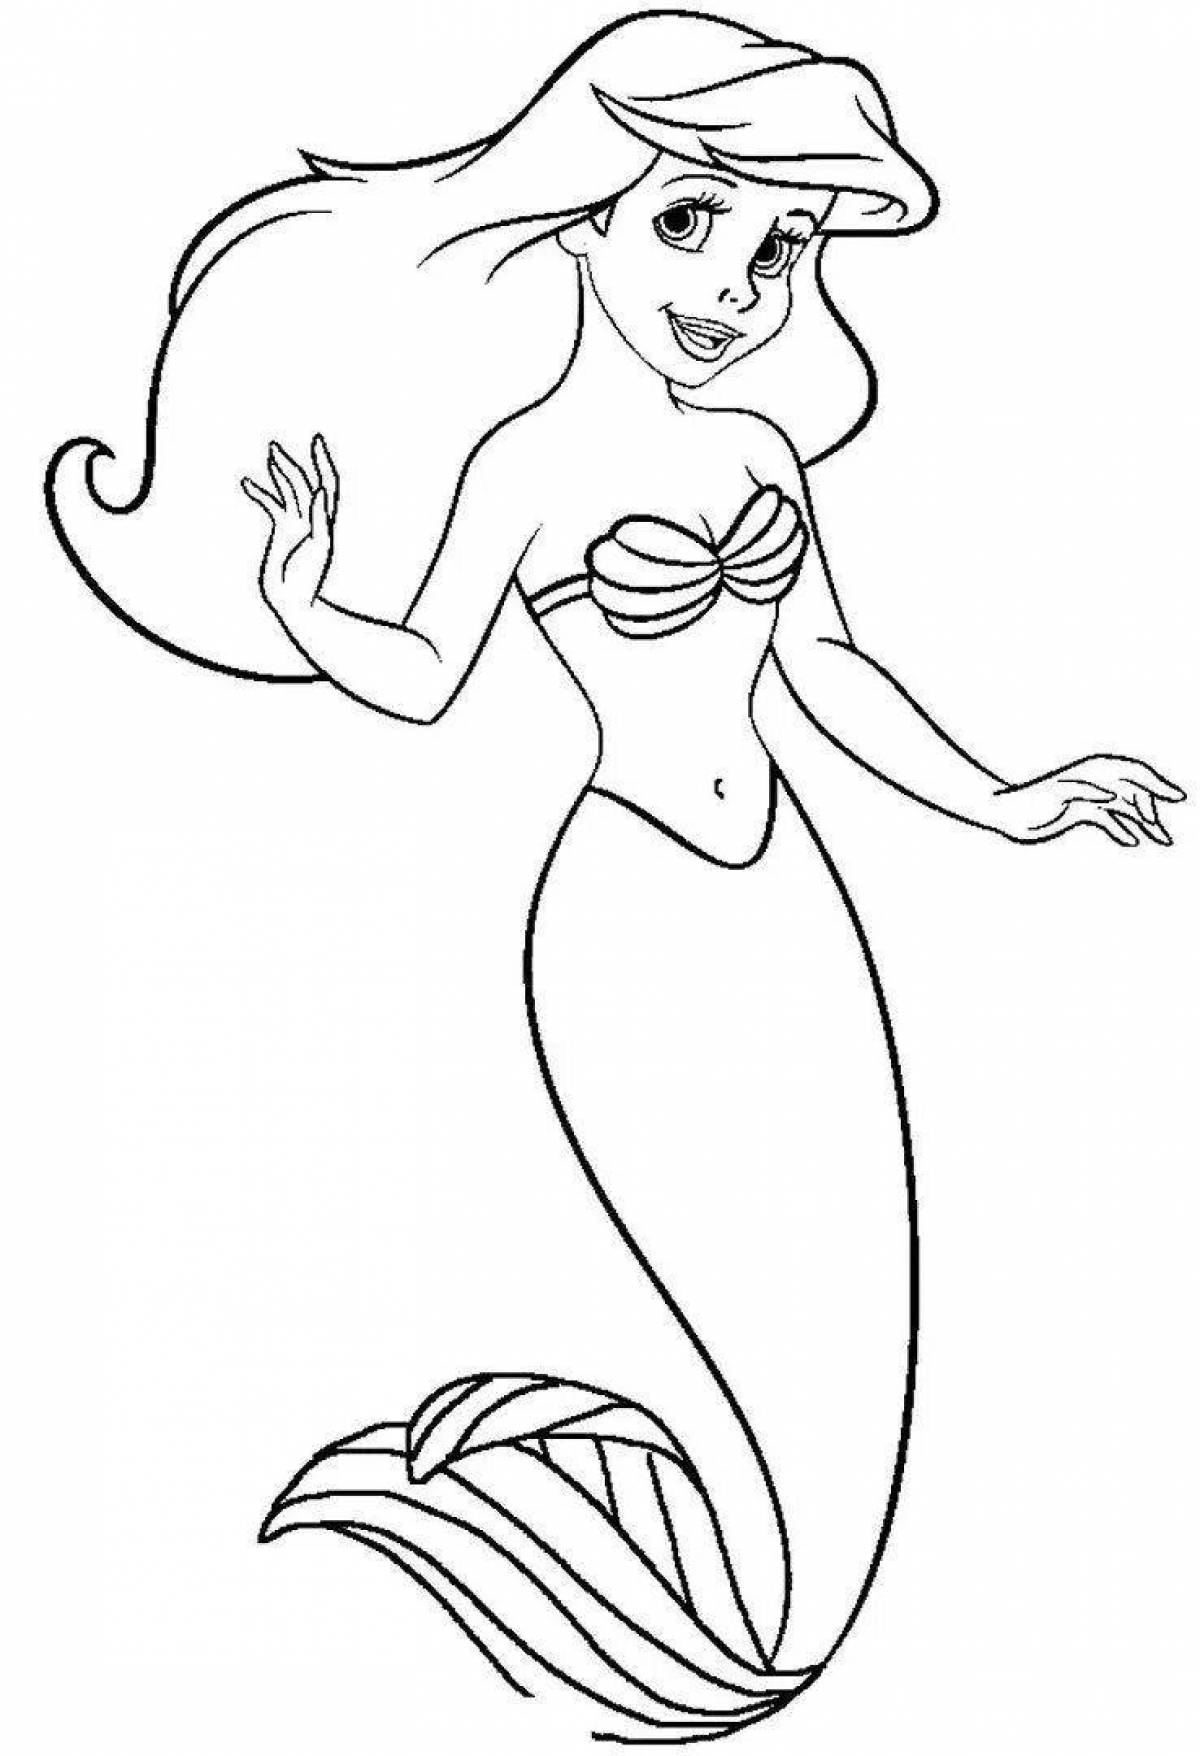 Delightful coloring drawing of a mermaid